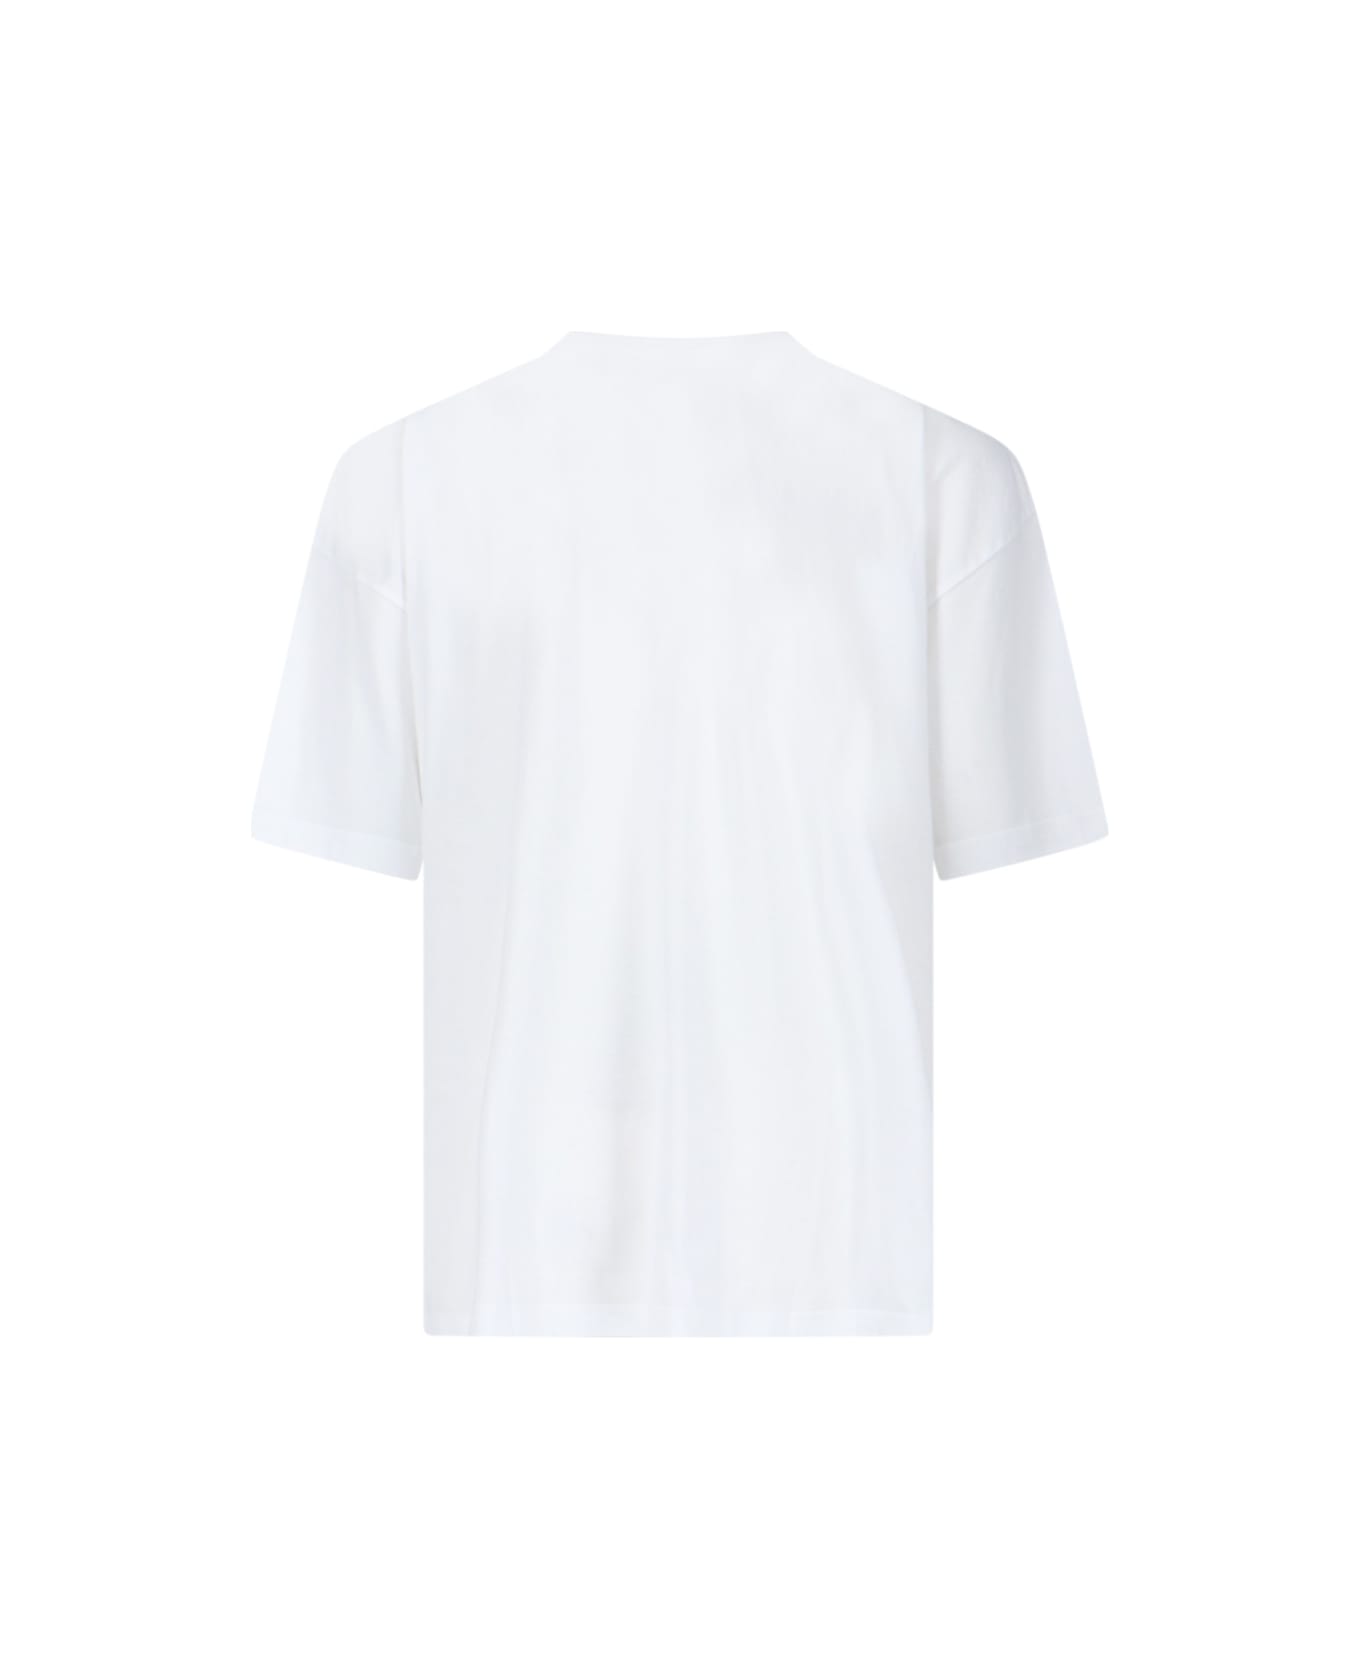 Y/Project Printed T-shirt - White シャツ